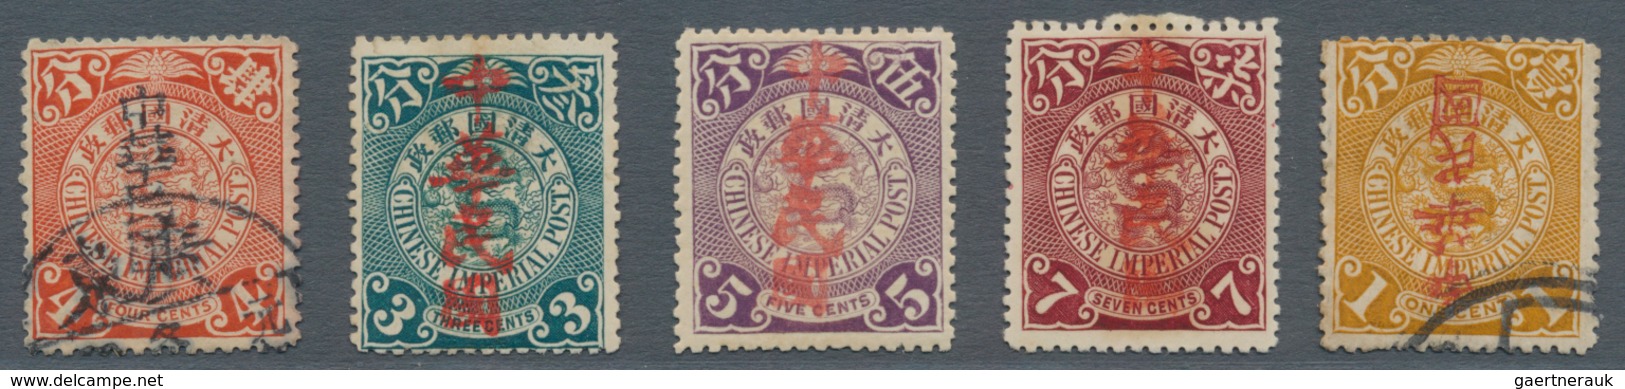 China: 1911, Local "China Republic" Overprints, Kwangtung Province: Foshan, In Black On 4 C. Red, Us - 1912-1949 République